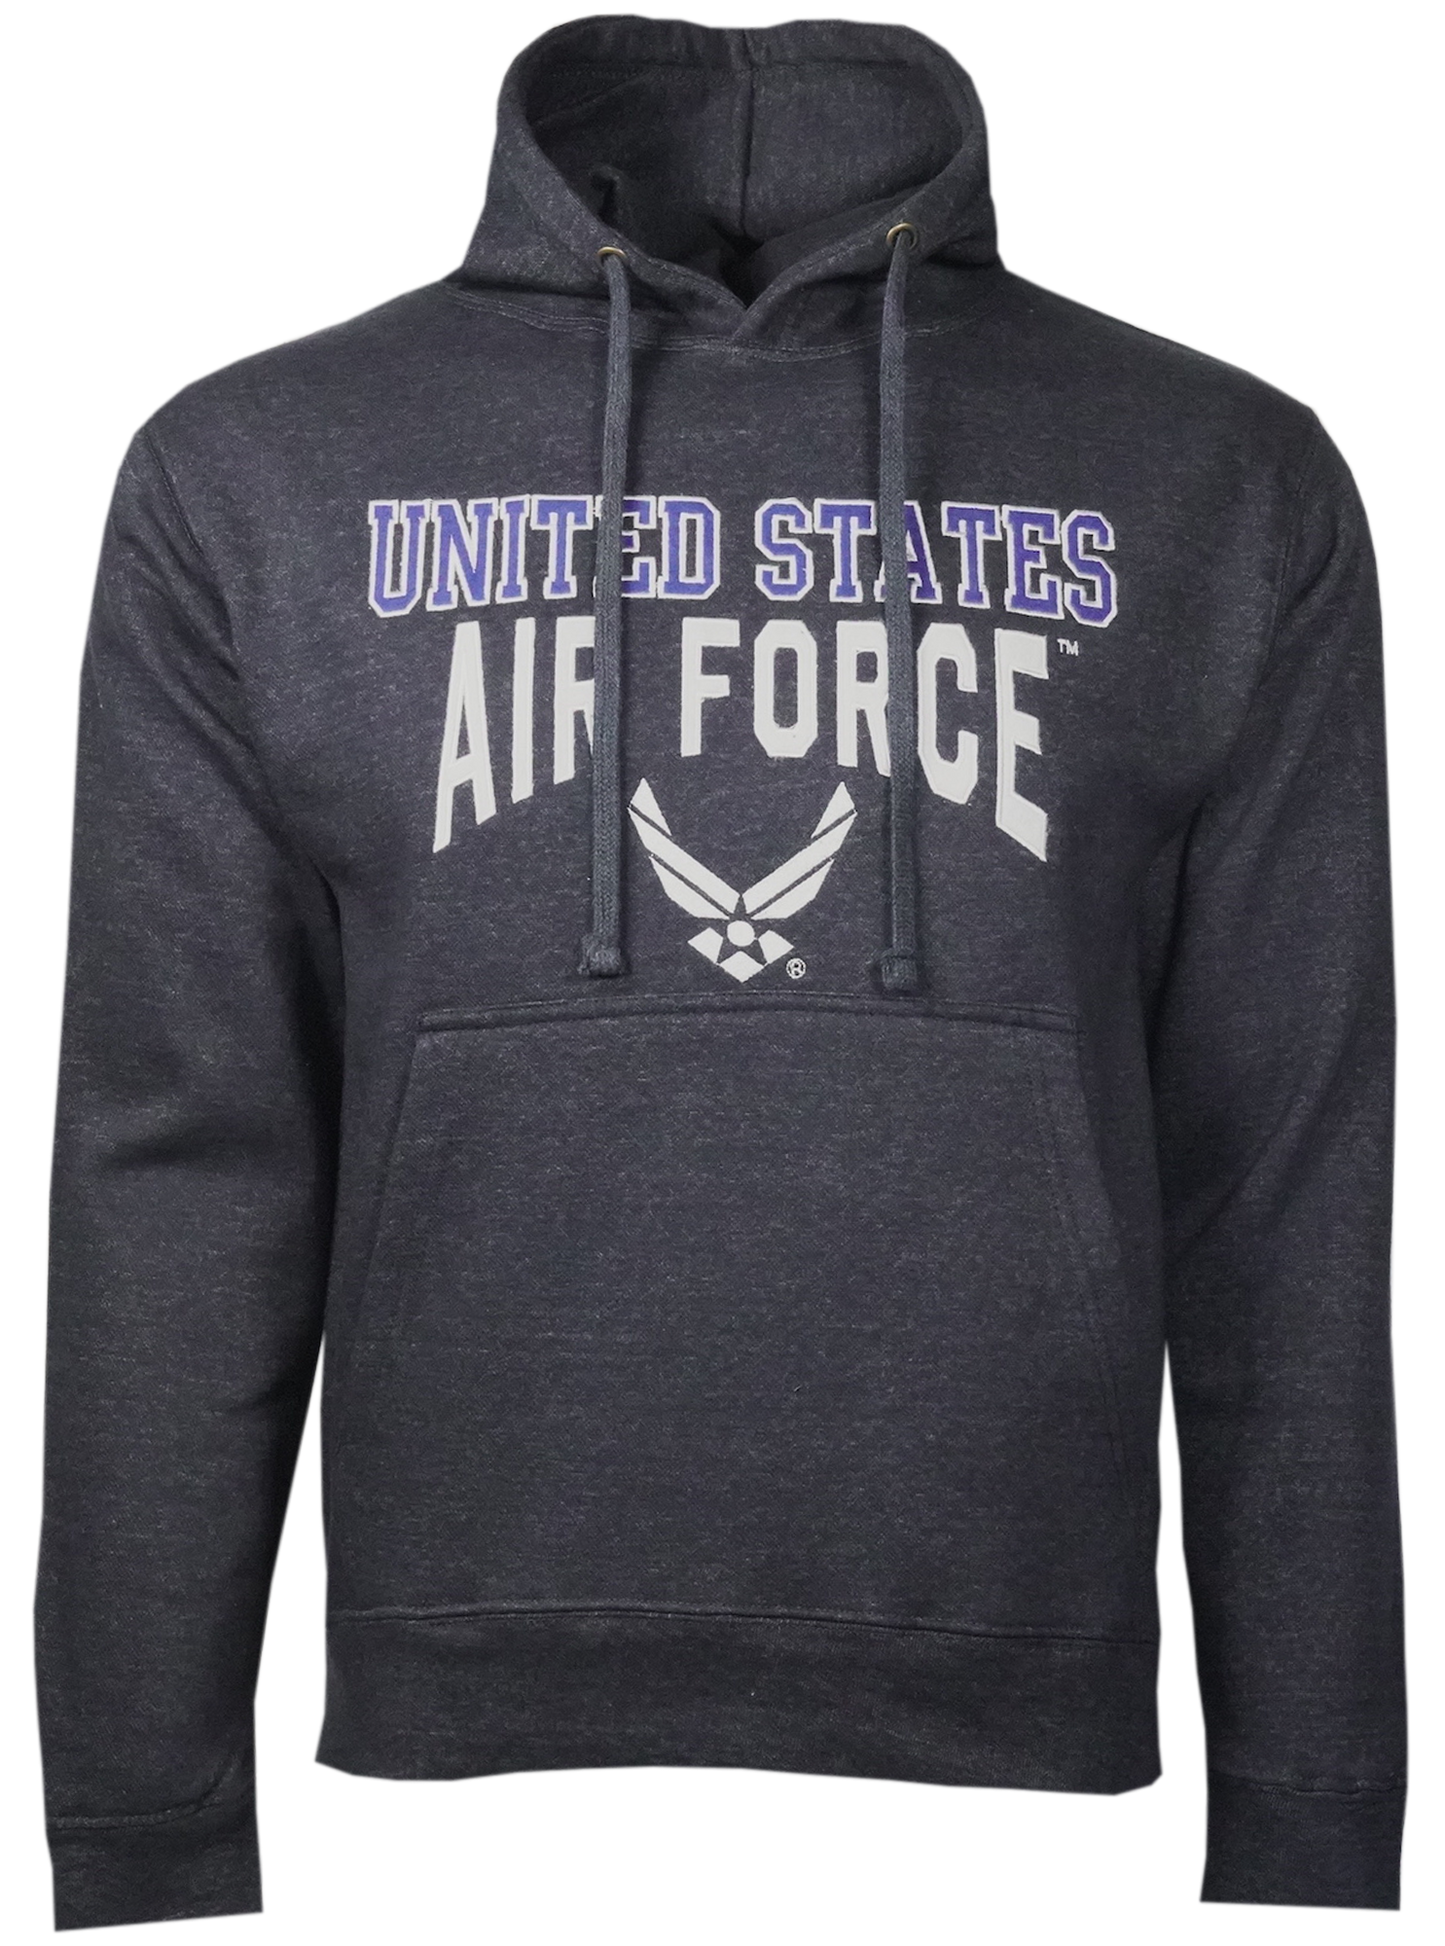 United States Air Force Wing Fleece Tight Knit Pullover